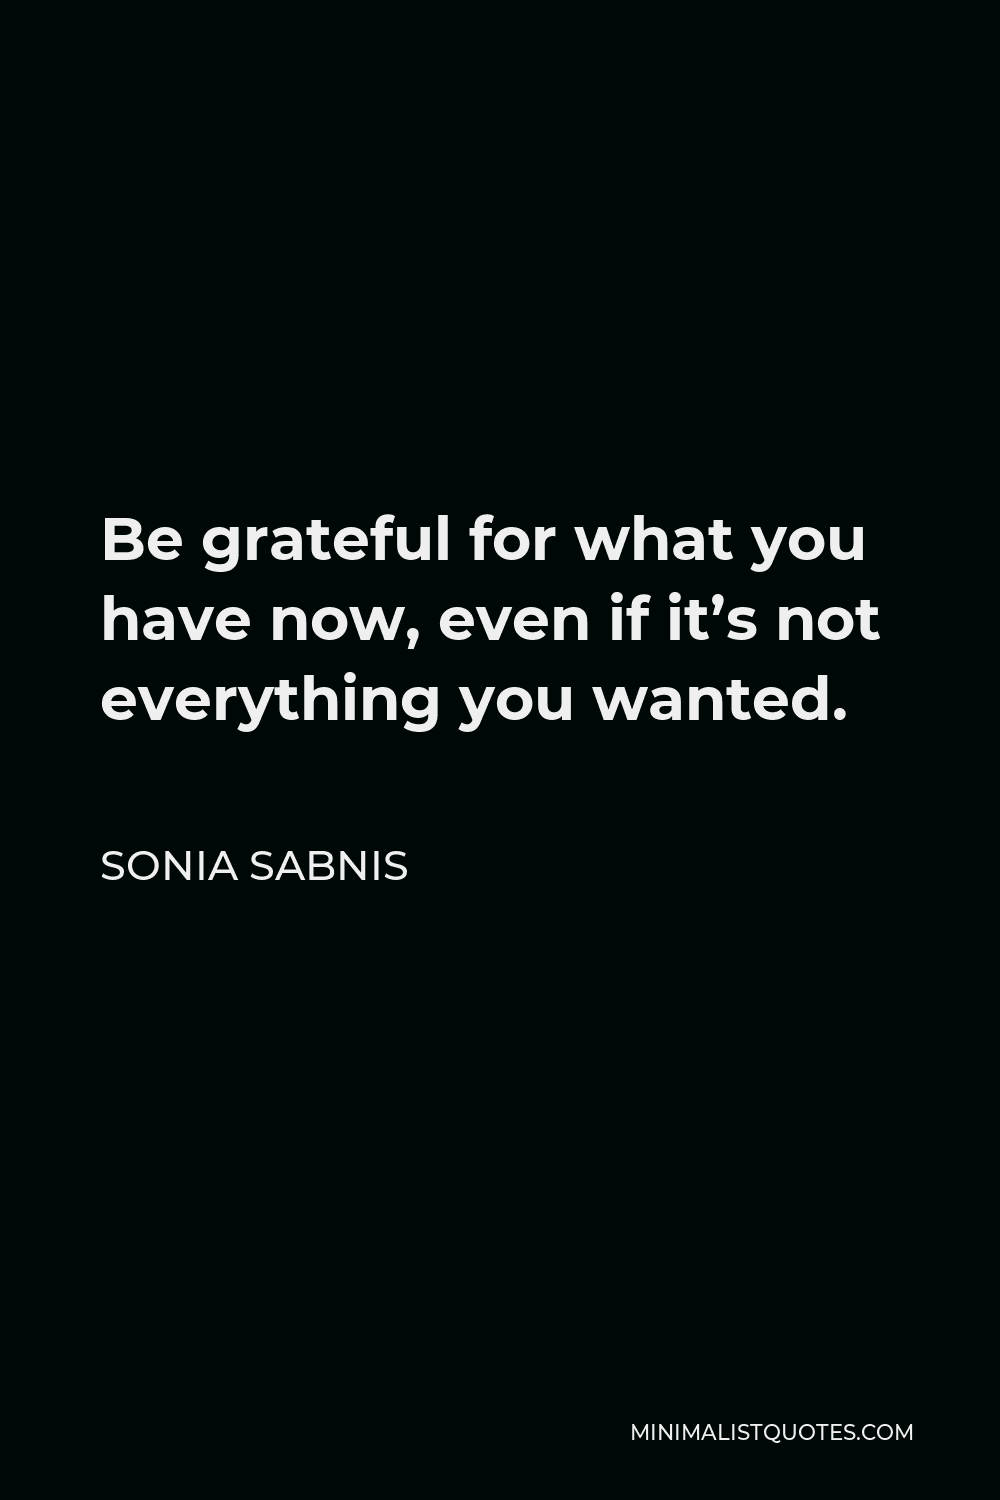 Sonia Sabnis Quote - Be grateful for what you have now, even if it’s not everything you wanted.